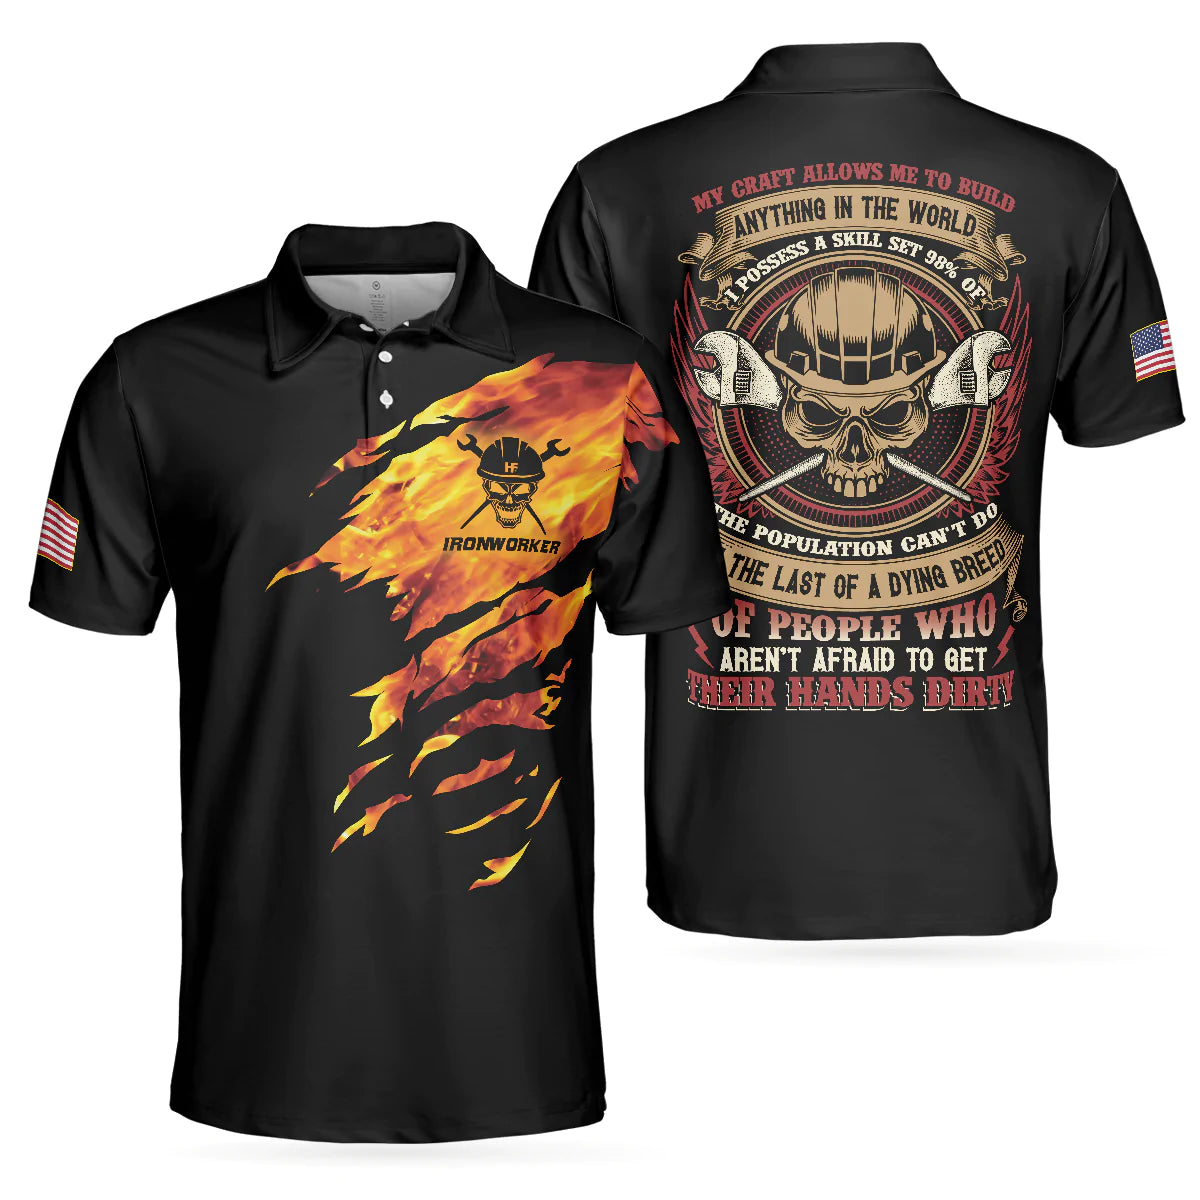 Men Ironworker Polo Shirt - Skull Ironworker Polo Shirt, Ironworker My Craft Allows Me To Build Anything Shirt For Men, Cool Gift For Ironworker Lovers